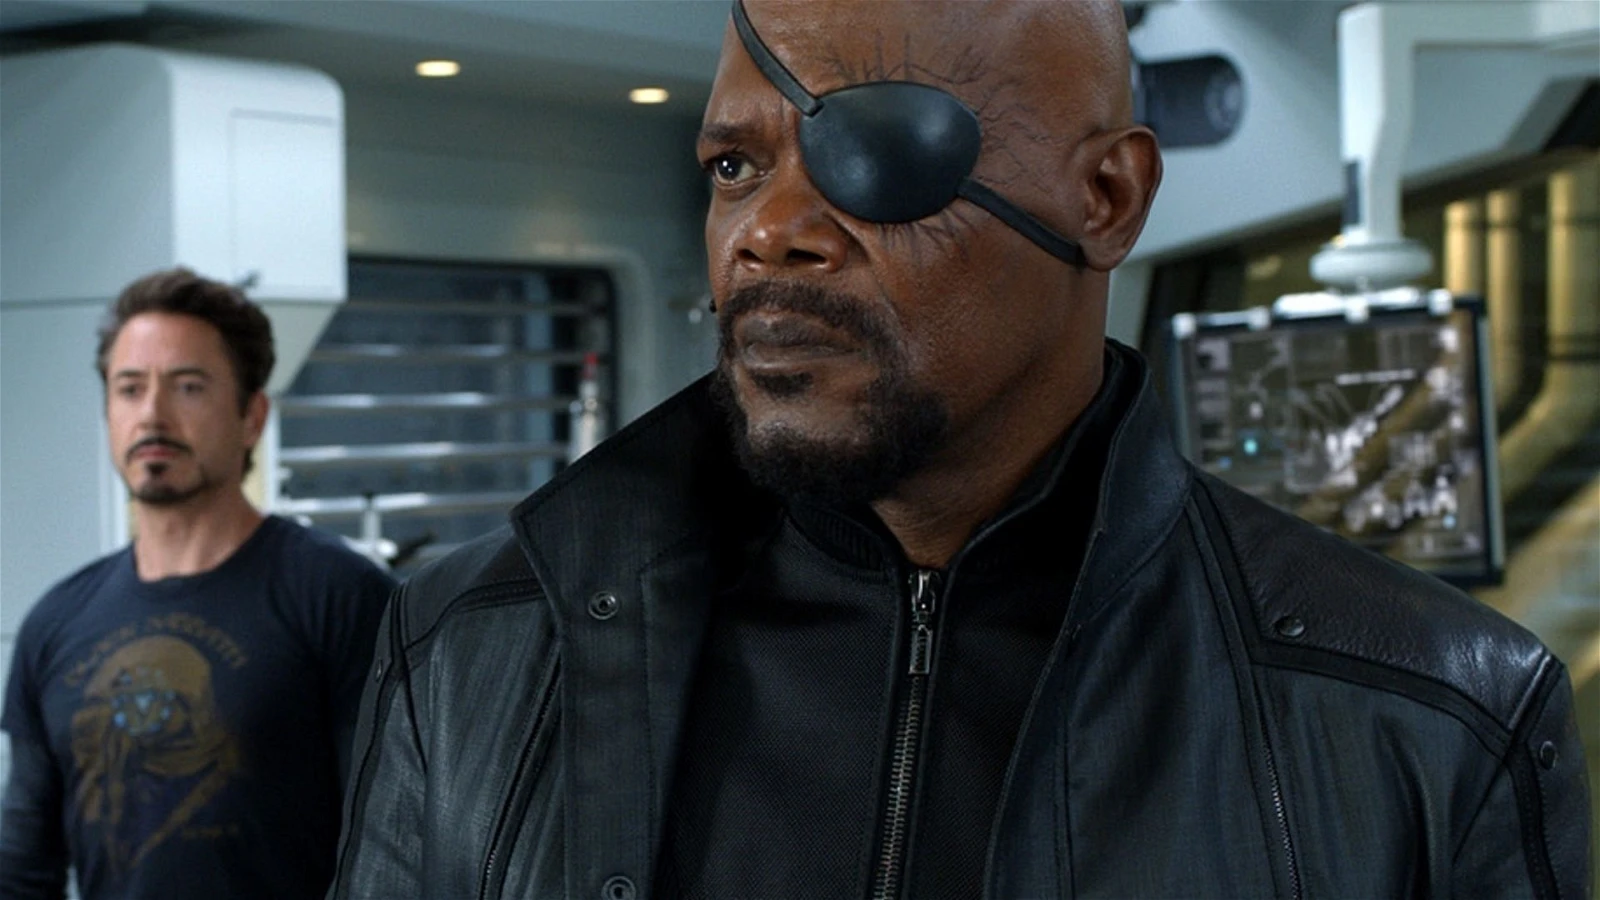 Samuel L. Jackson staring worried in this scene with Robert Downey Jr. 